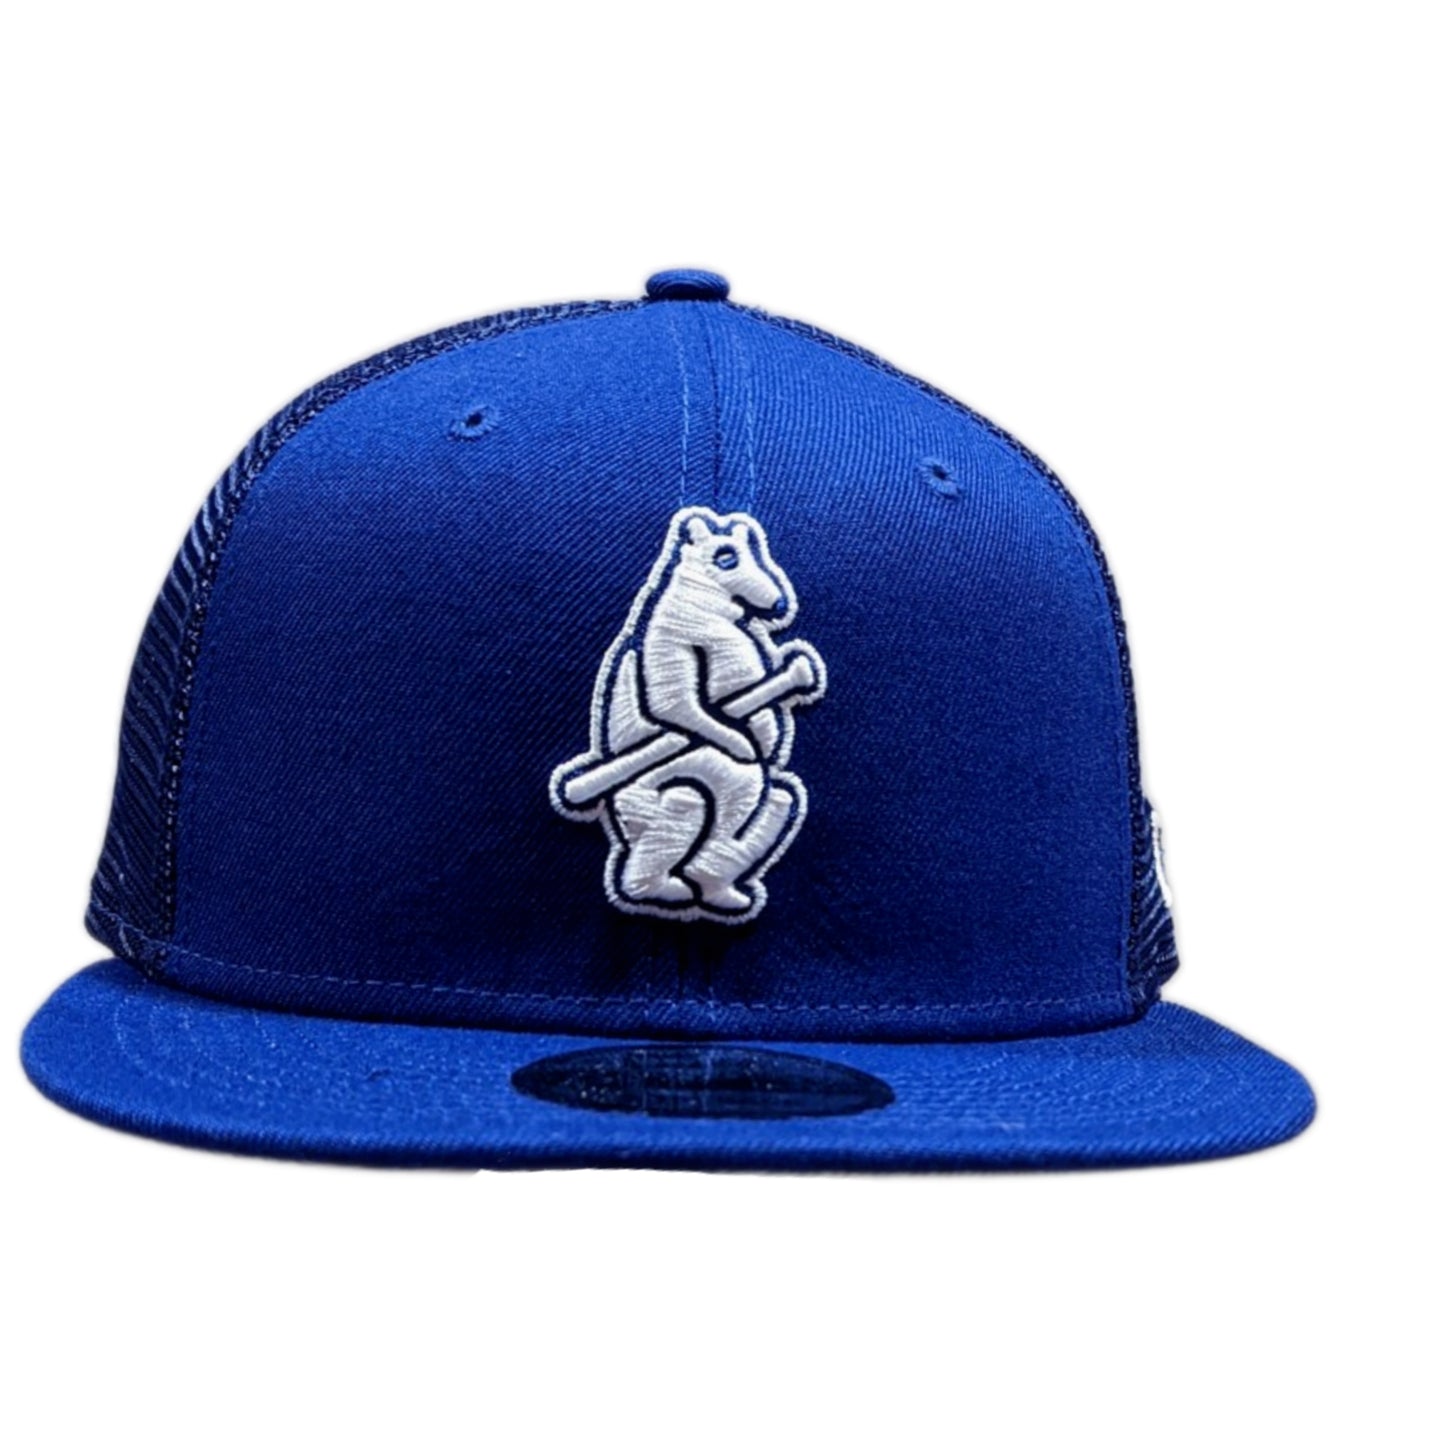 Chicago Cubs New Era Classic Cooperstown Collection Blue 9FIFTY Mesh Trucker Snapback Hat